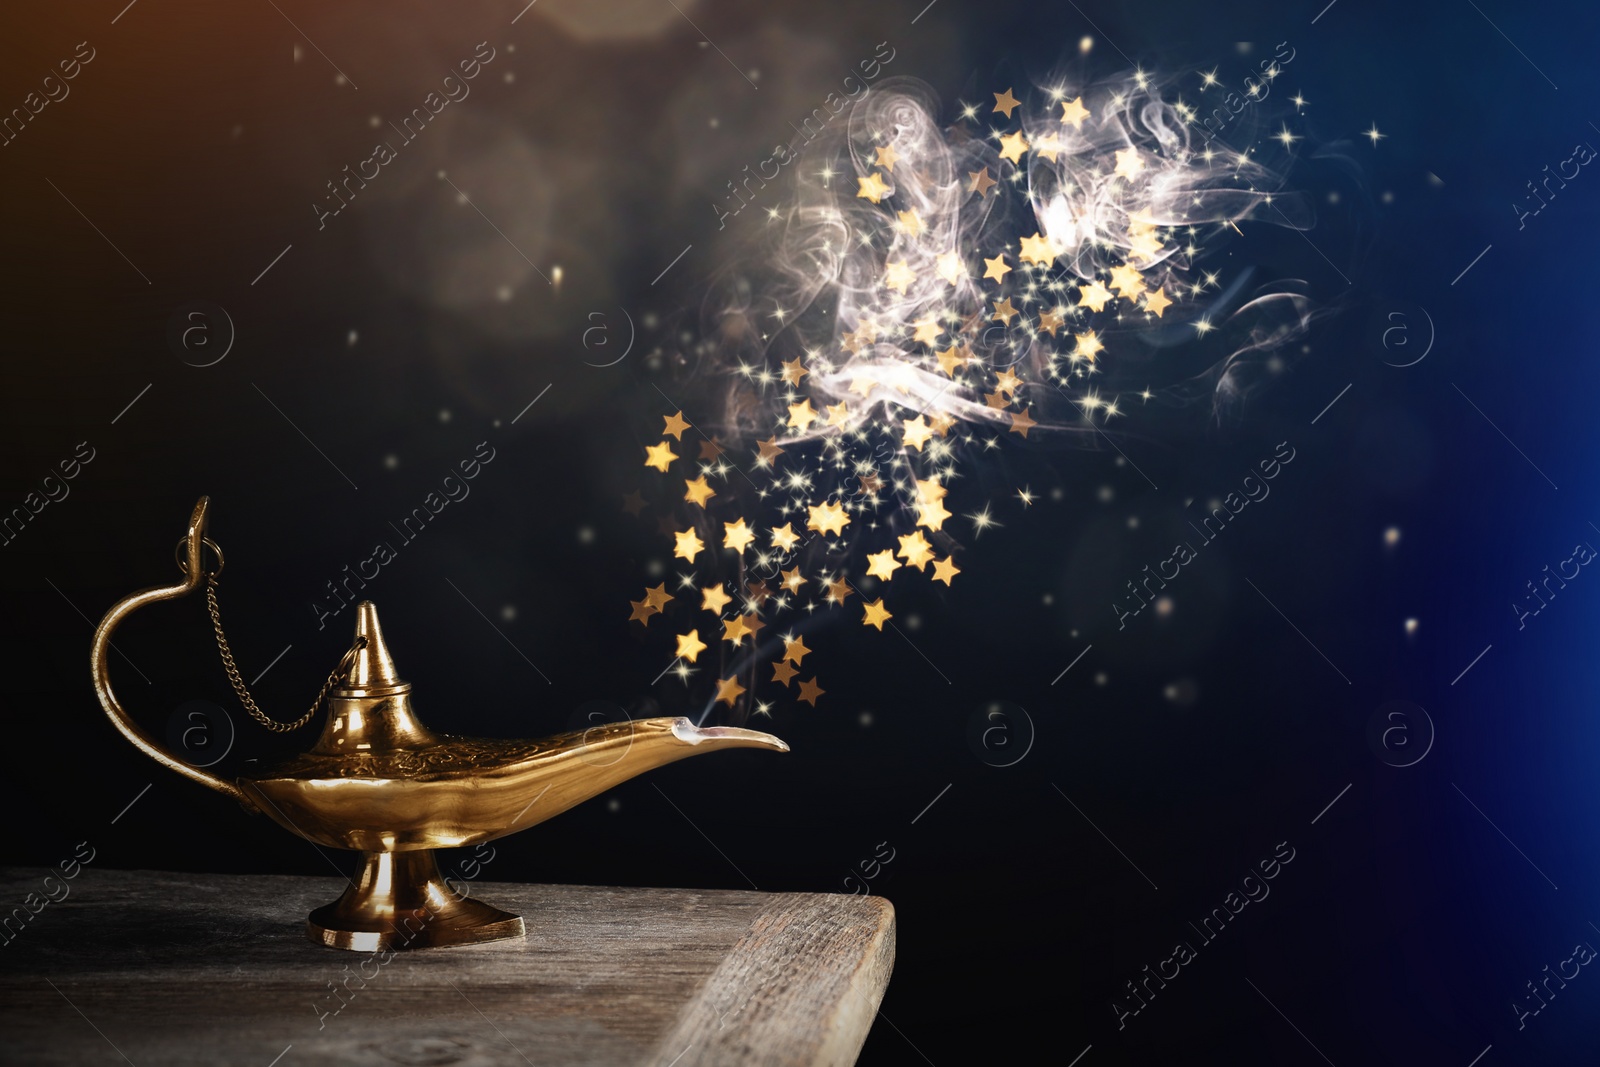 Image of Genie appearing from magic lamp of wishes. Fairy tale 